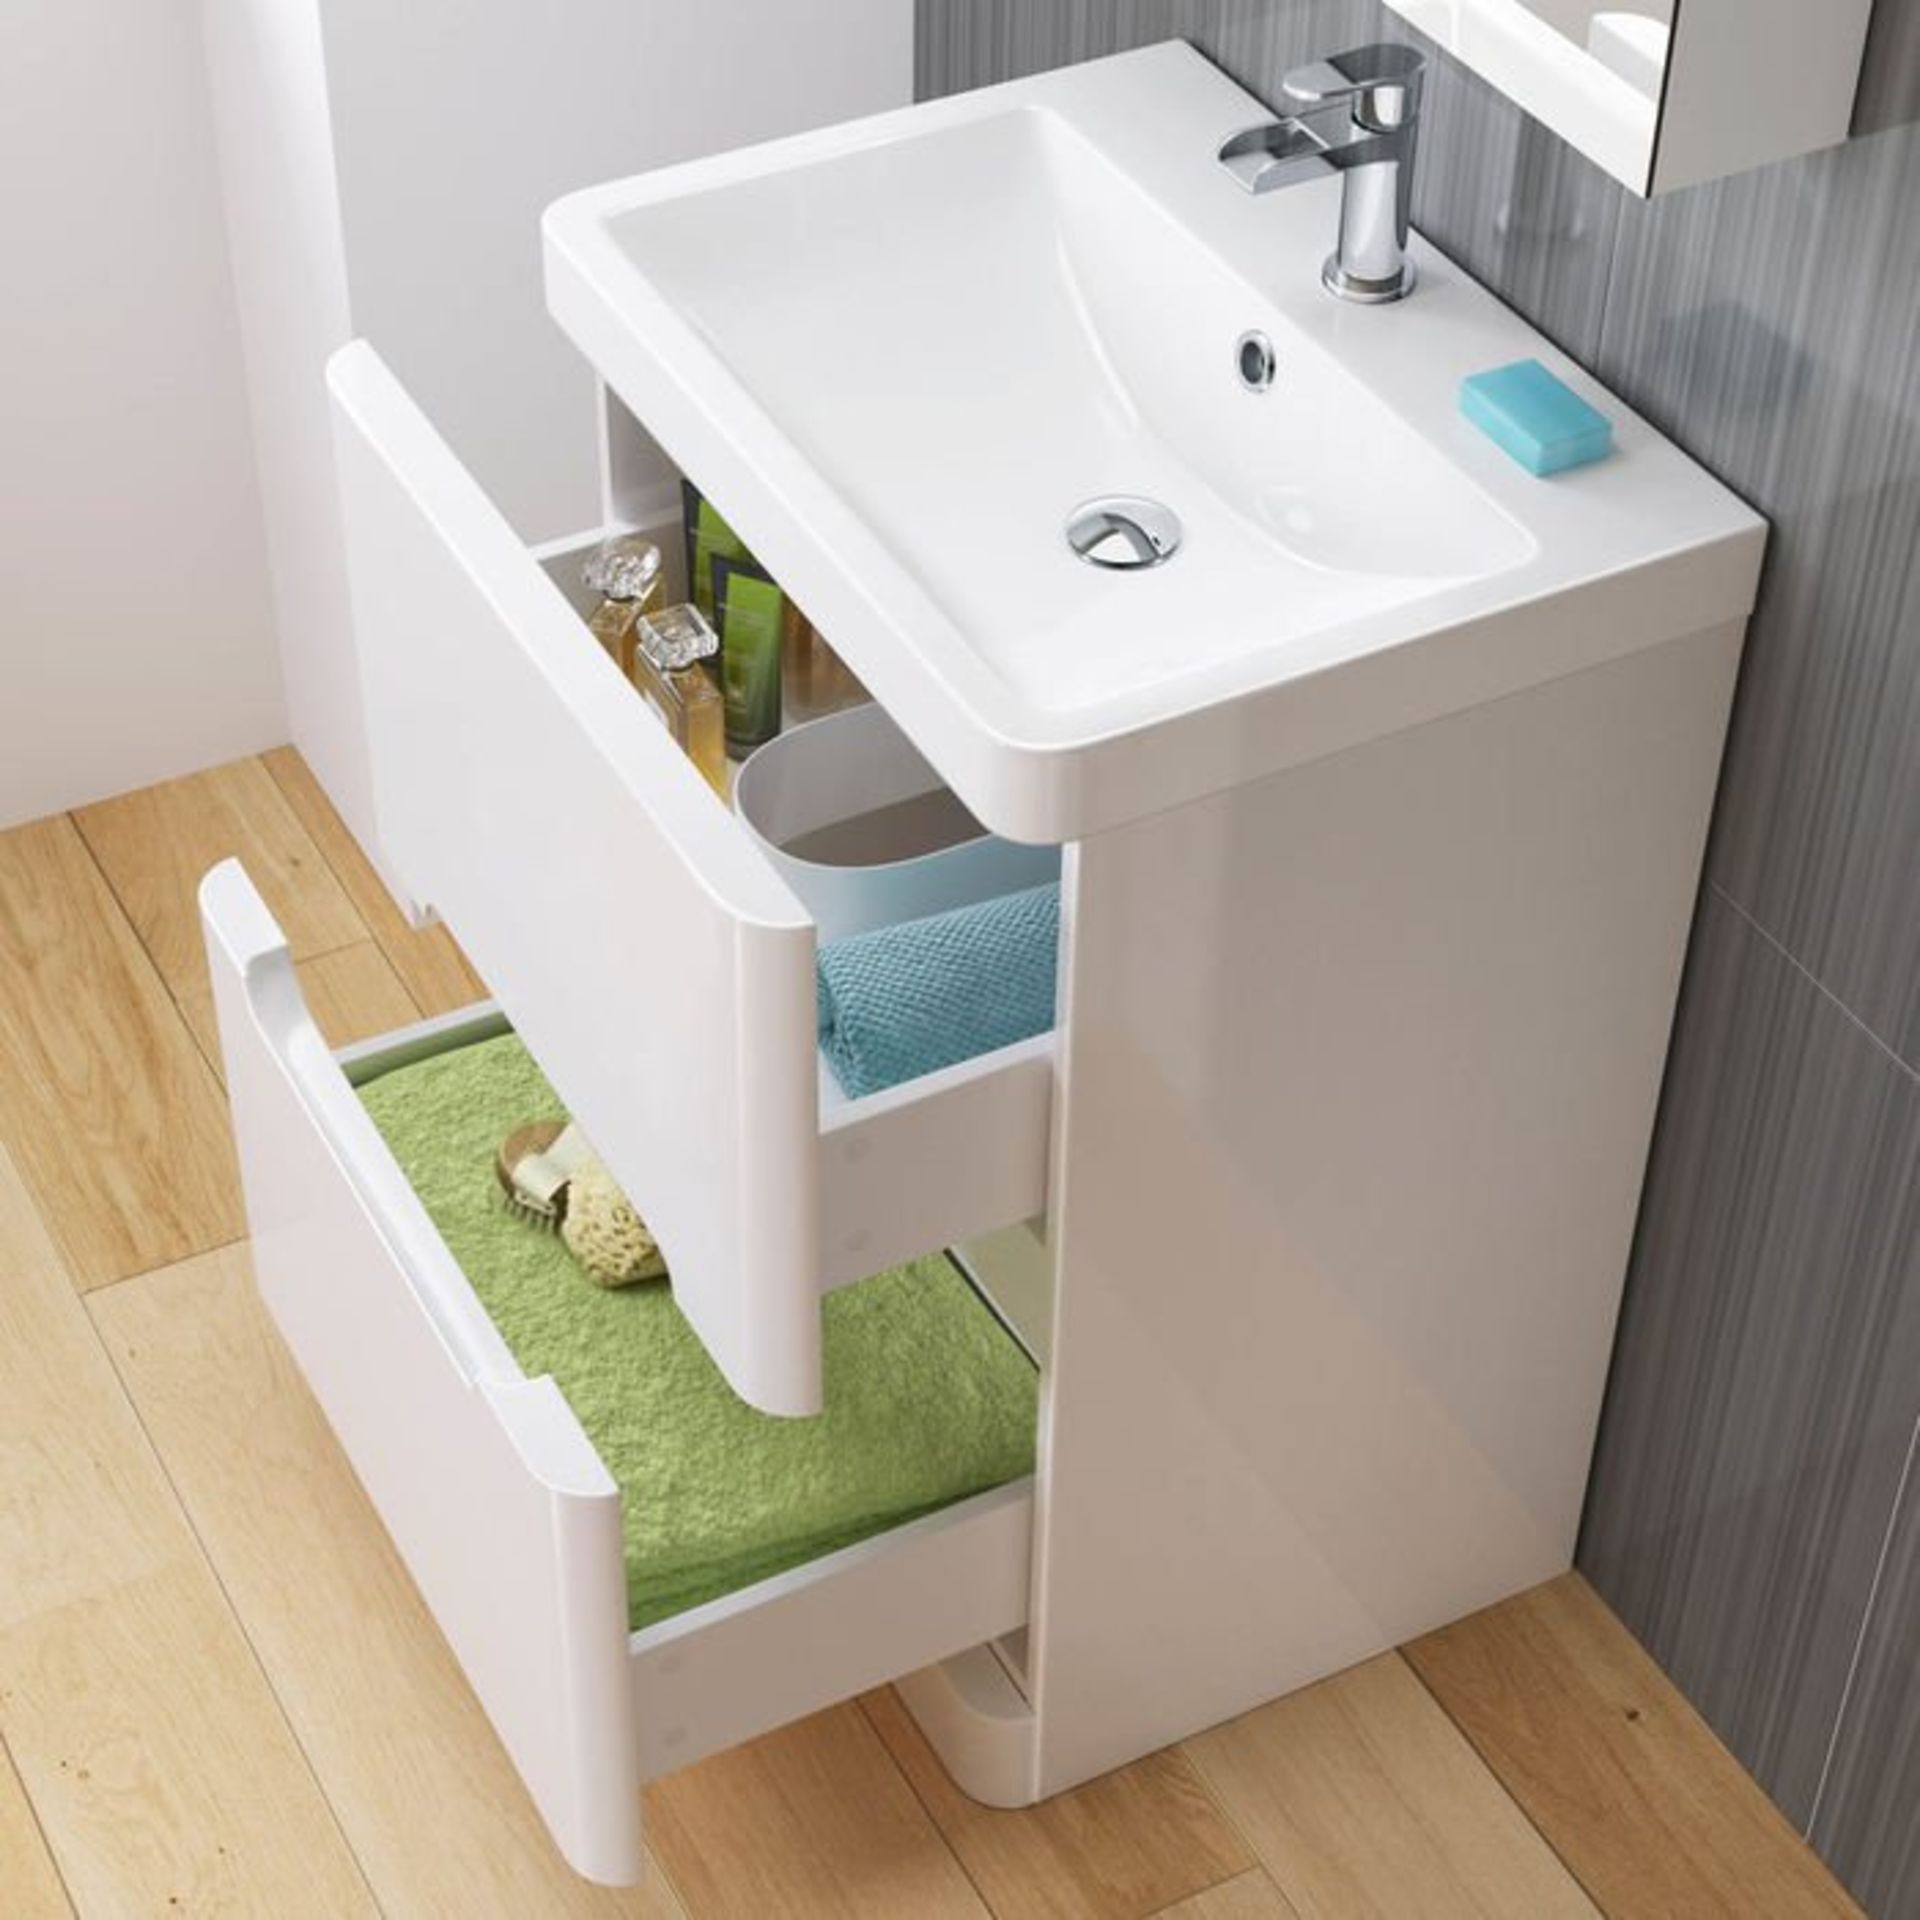 (M3) 600mm Tuscany Gloss White Built In Basin Double Drawer Unit - Floor Standing. RRP £499.99. - Image 3 of 5